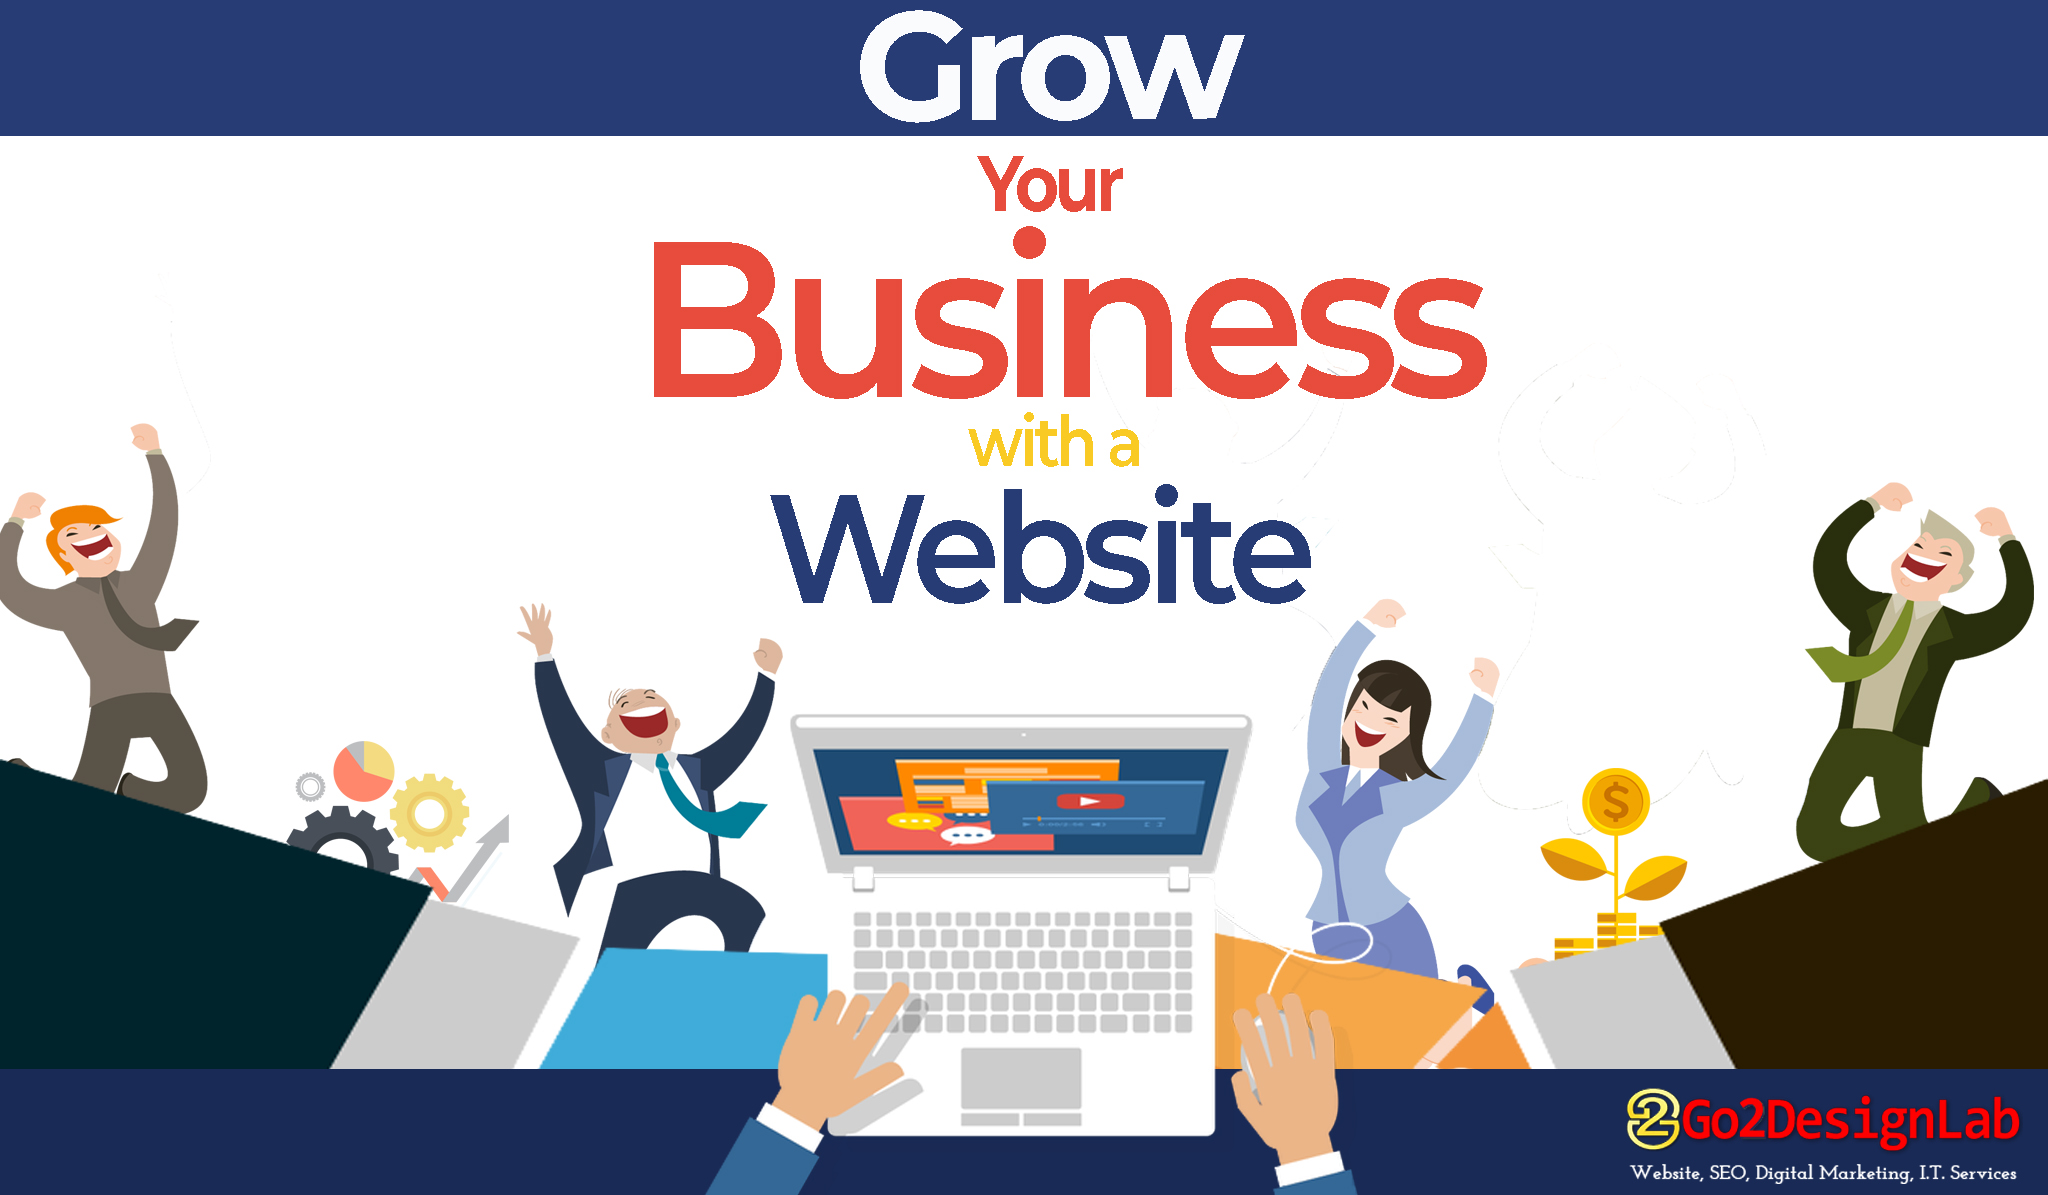 Grow Your Business With a Website